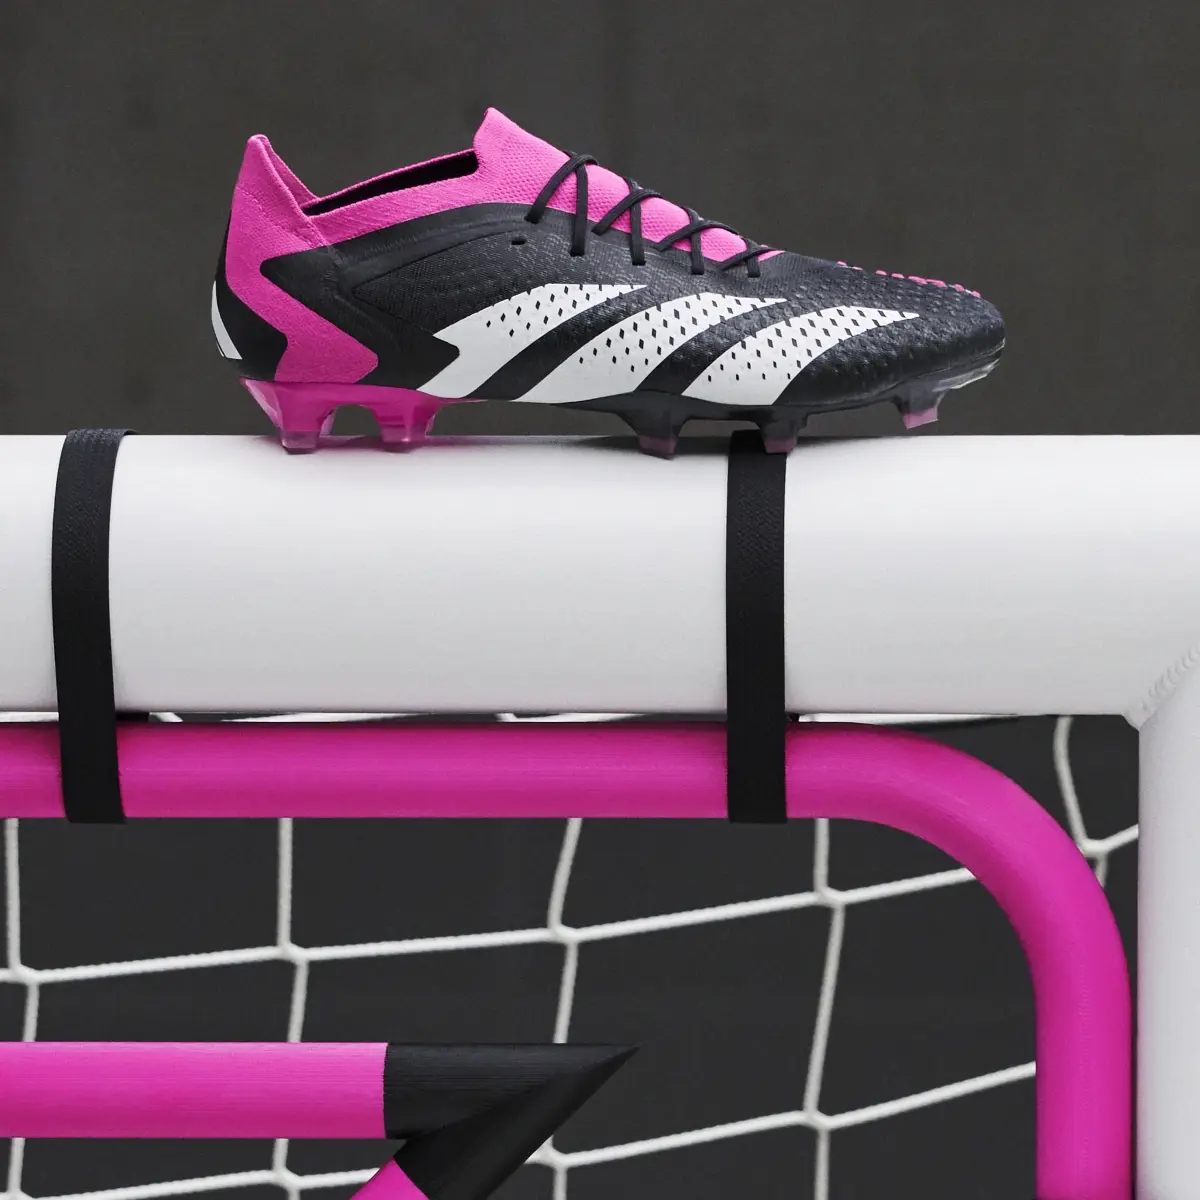 Adidas Predator Accuracy.1 Low Firm Ground Boots. 2